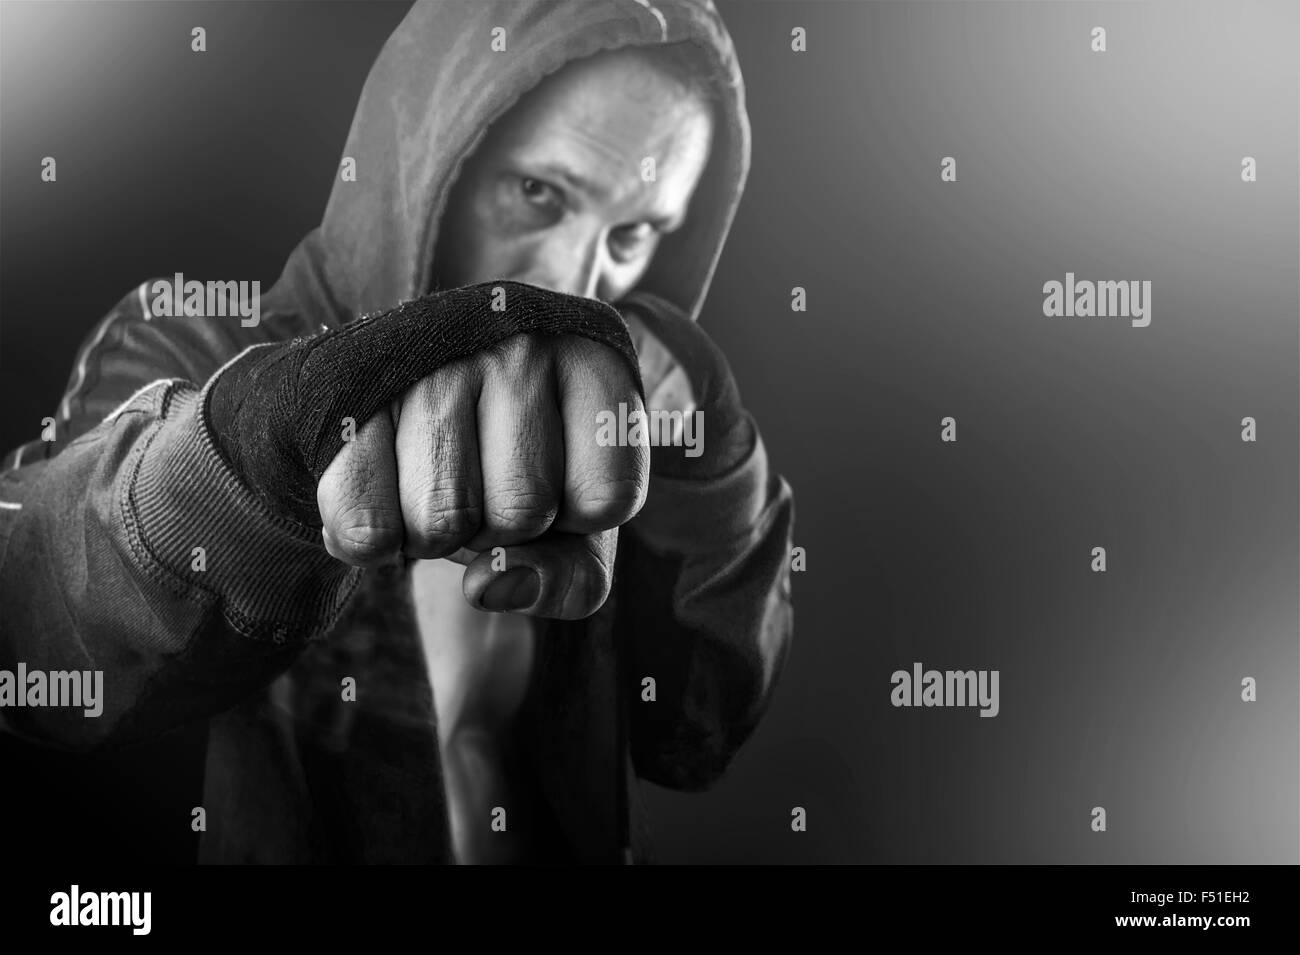 Black and white fist of young dangerous man closeup. strong serious  athletic man wearing hoodie shirts standing in boxing pose Stock Photo